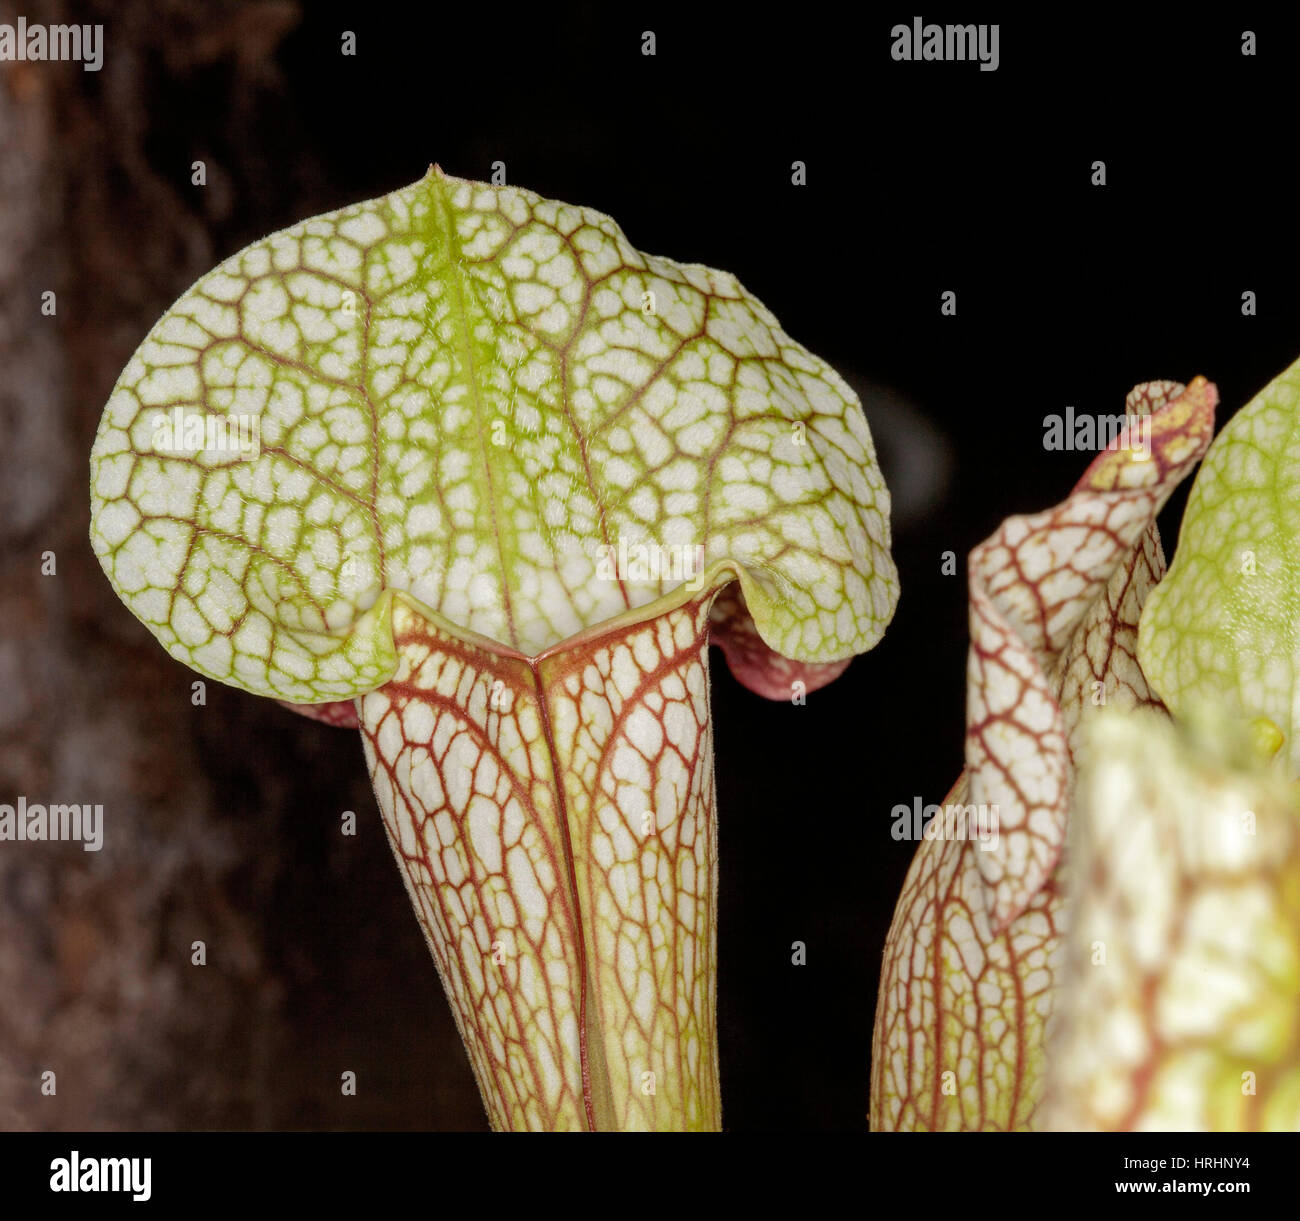 Sarracenia leucophylla, insect-eating trumpet pitcher plant with attractive white pitchers with decorative red veins on dark background Stock Photo